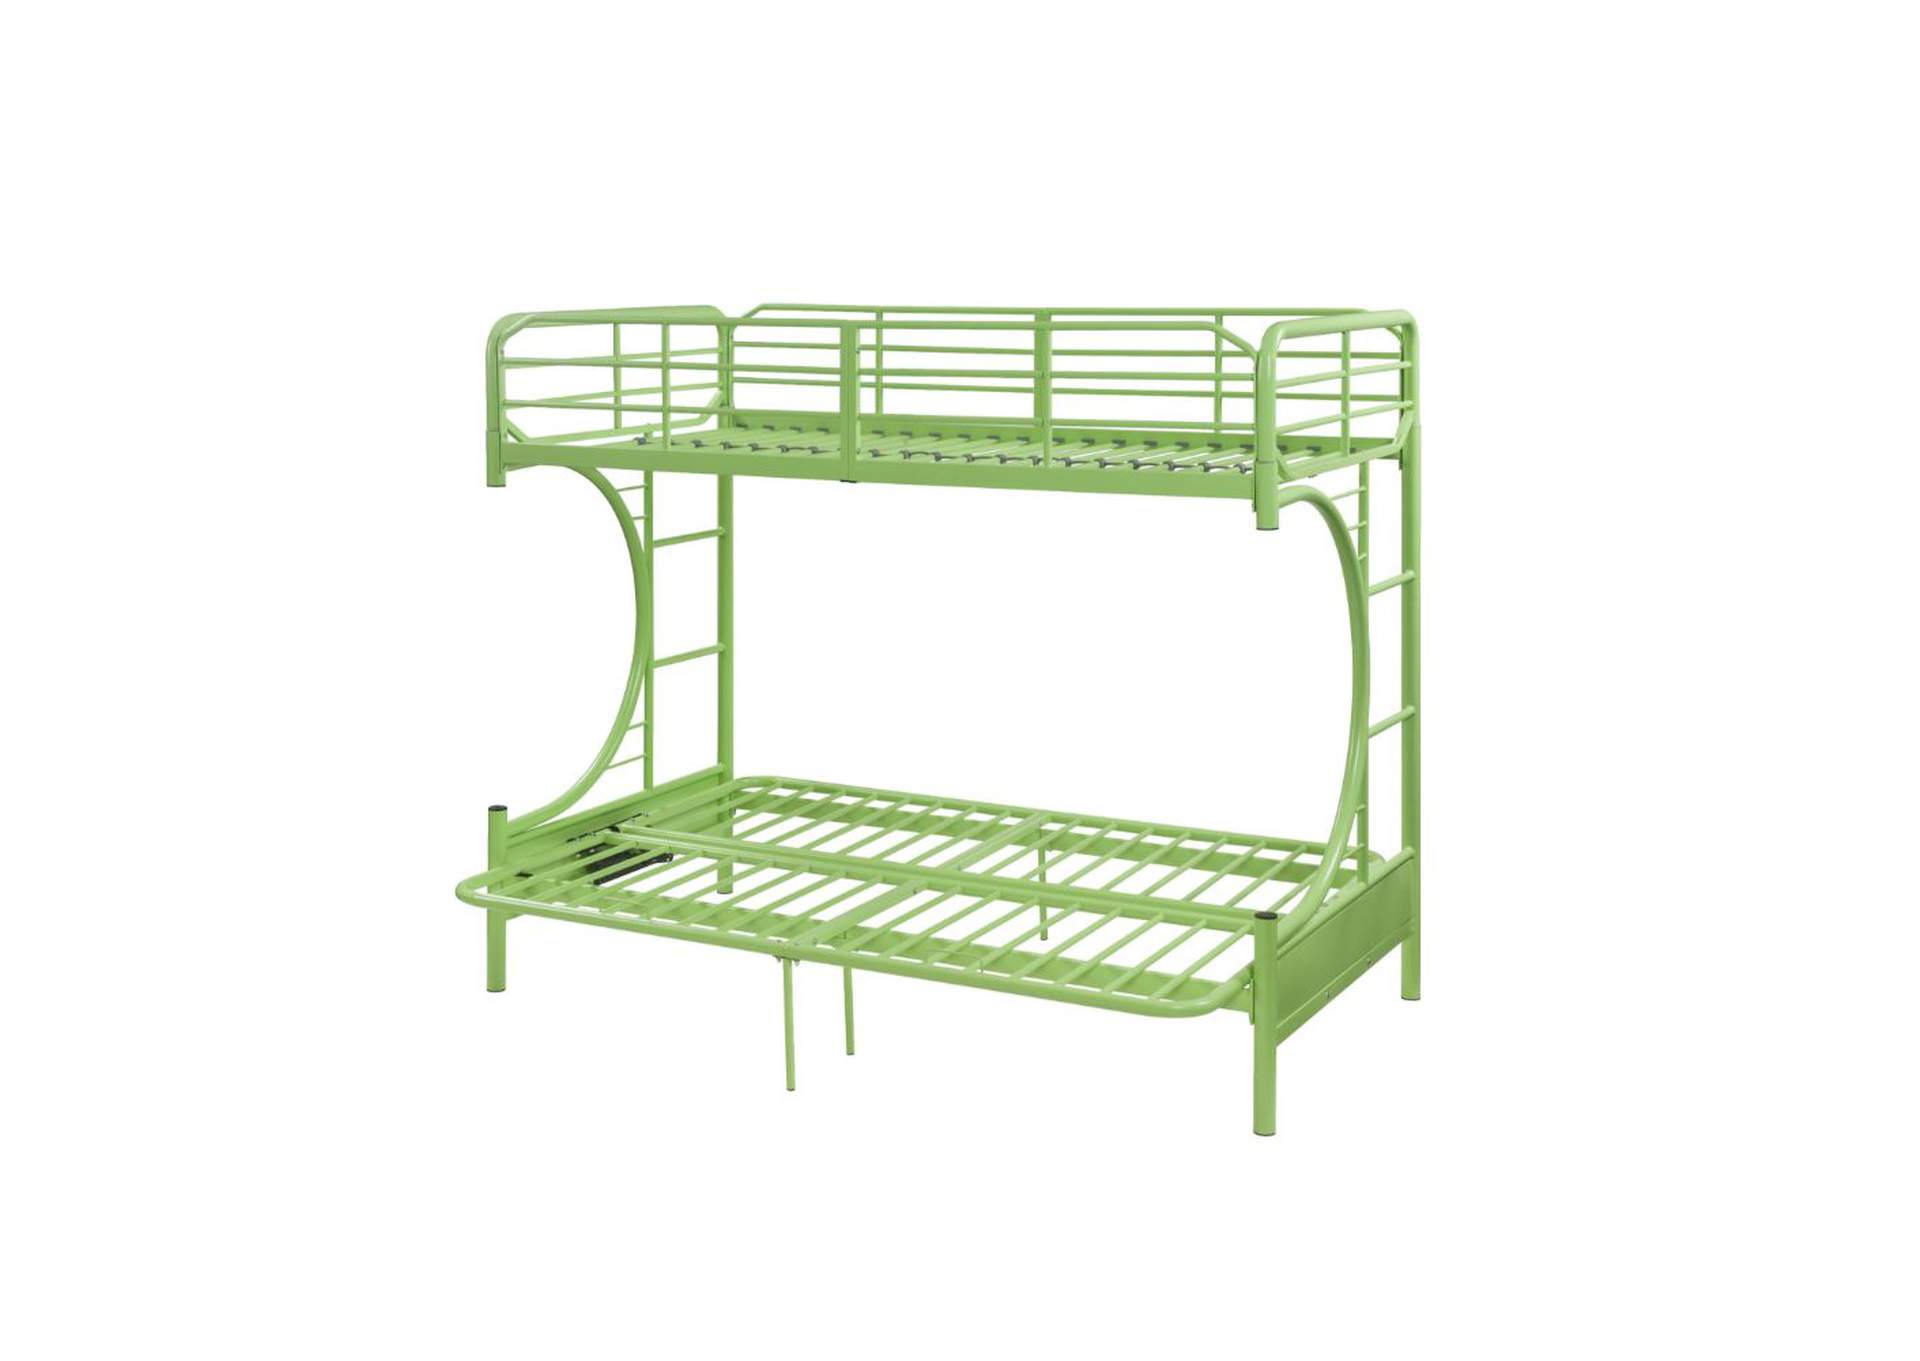 Green Eclipse Twin Full Futon Bunk Bed, Eclipse Futon Bunk Bed